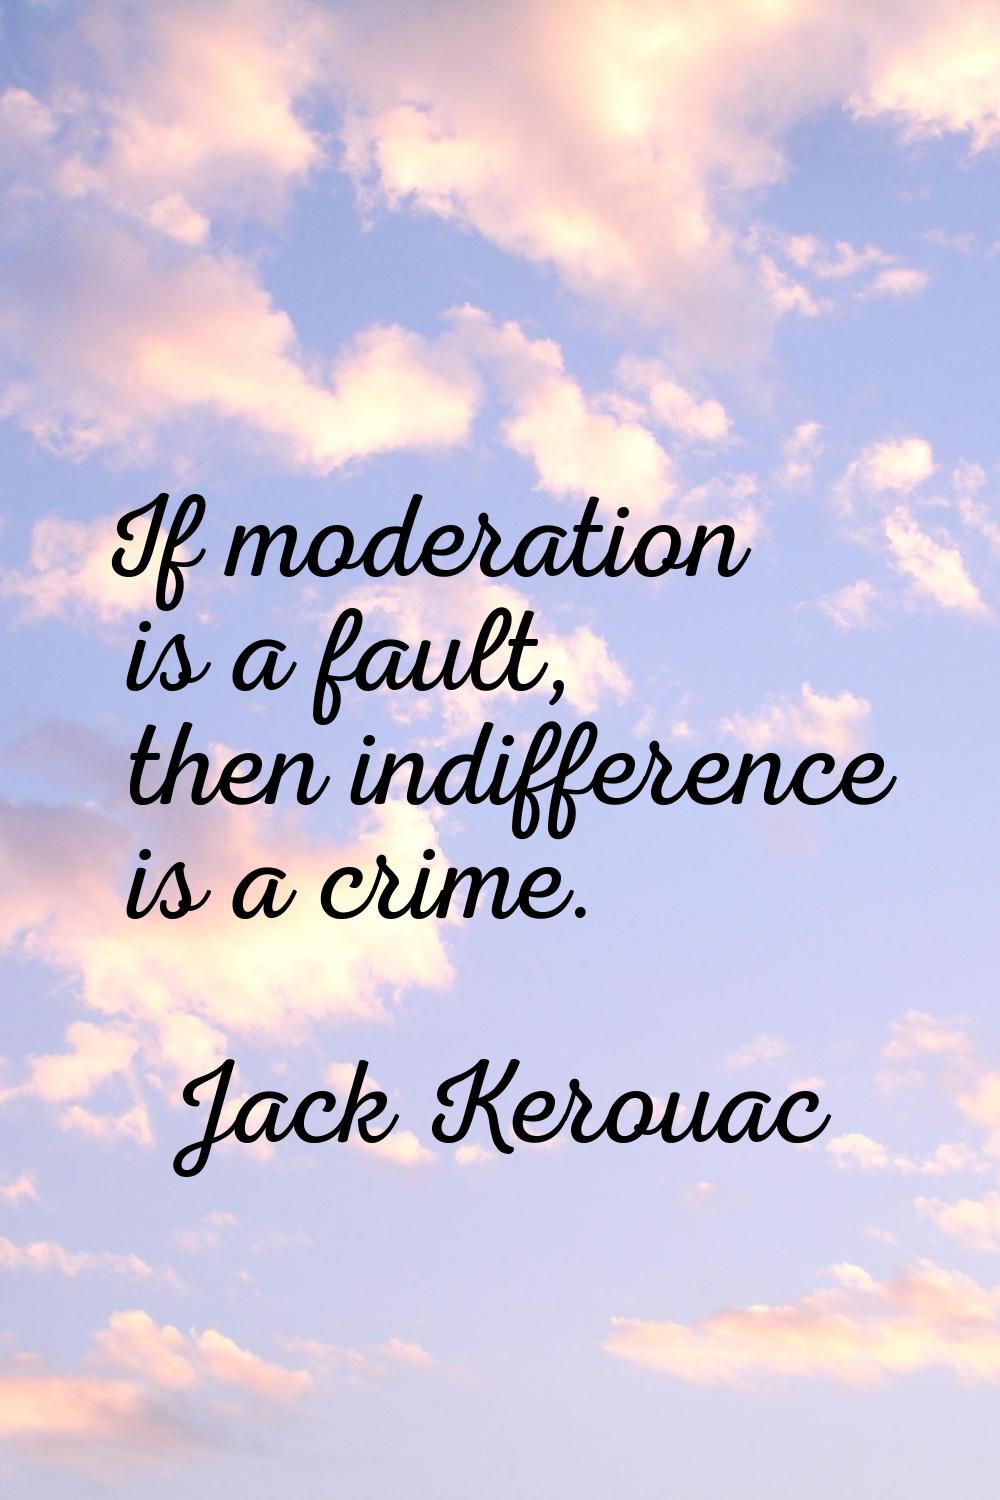 If moderation is a fault, then indifference is a crime.